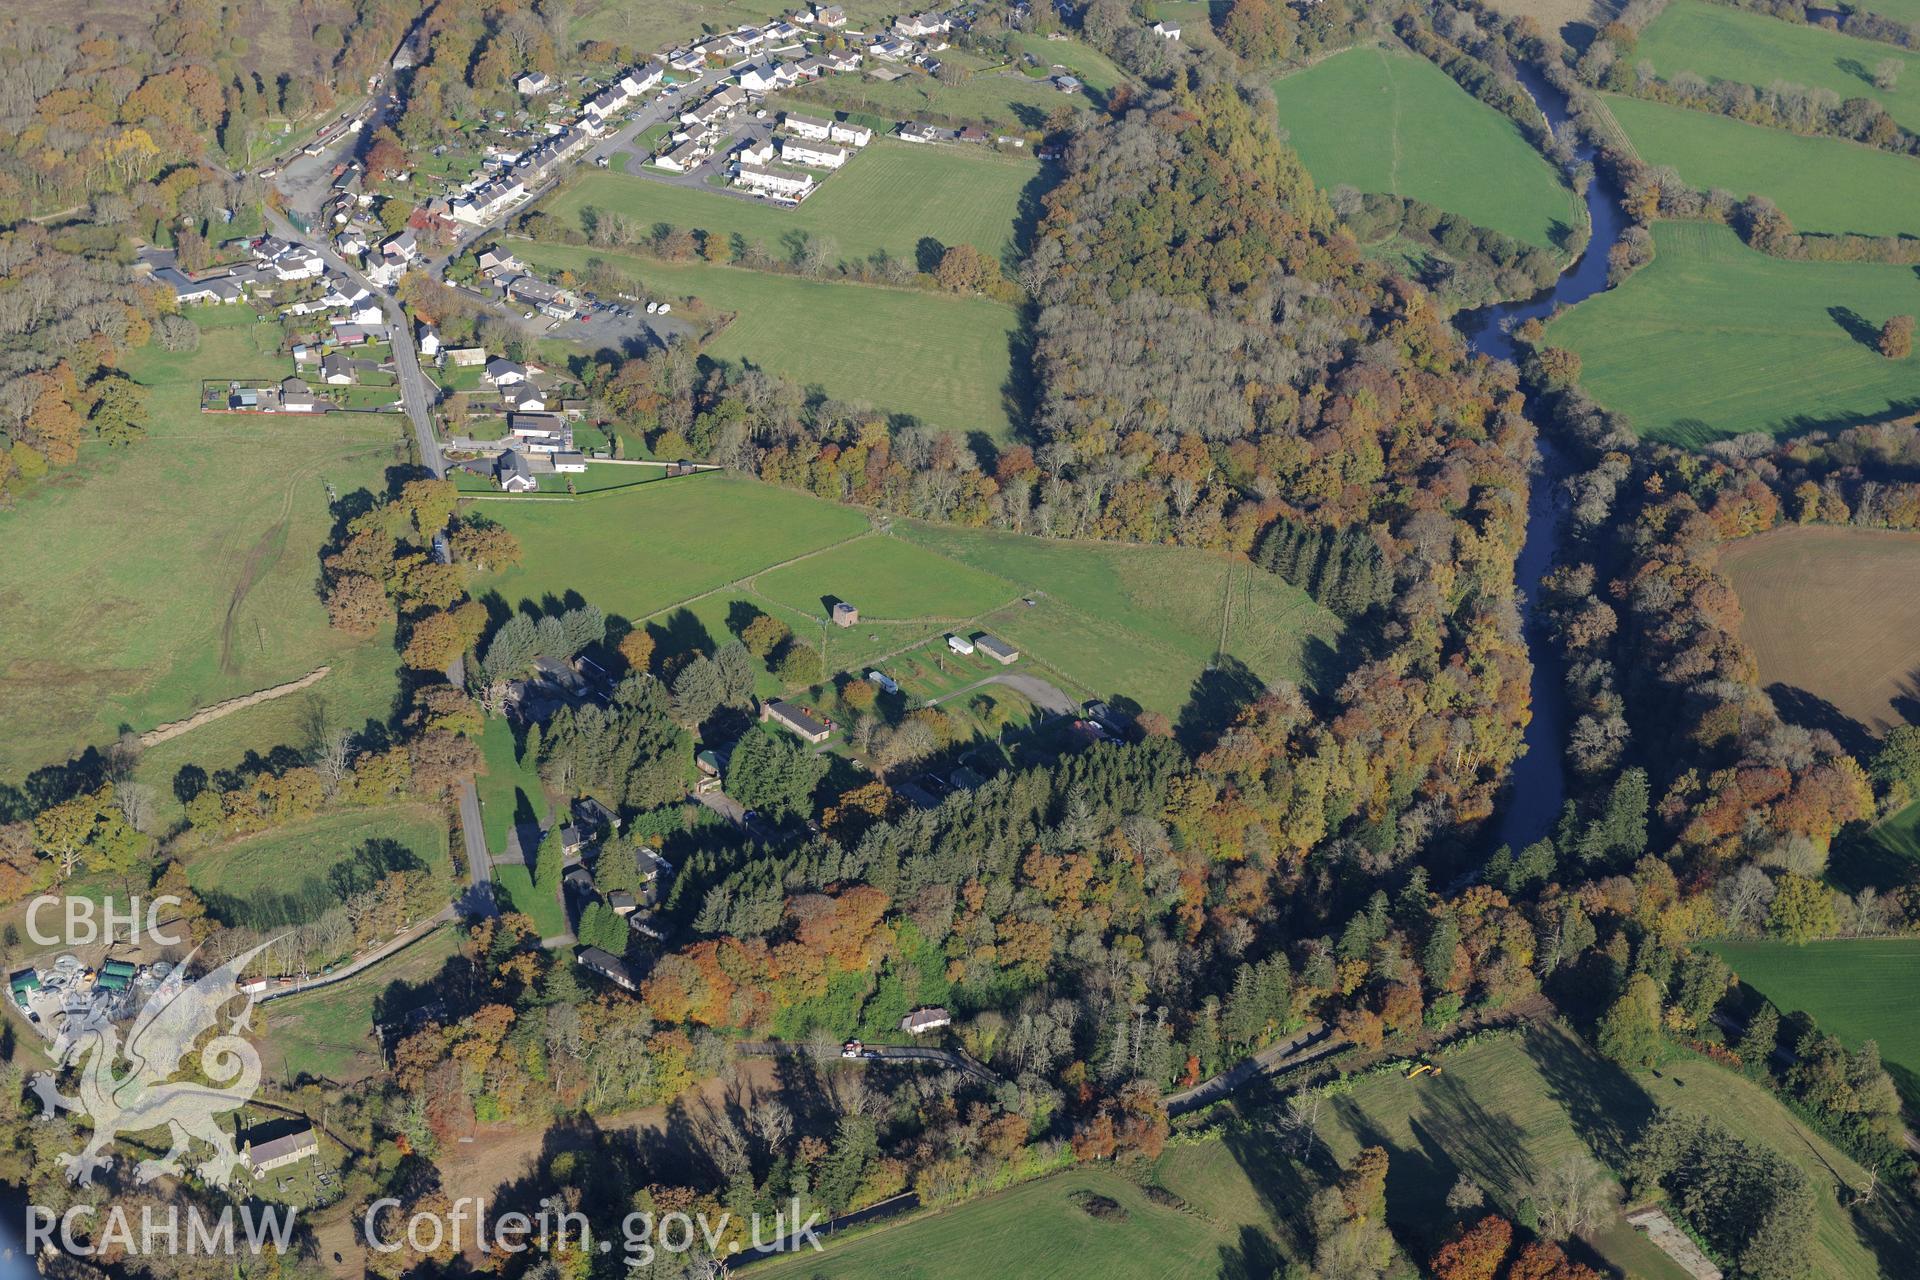 Caerau hillfort, Henllan prisoner of war camp and the village of Henllan, near Newcastle Emlyn. Oblique aerial photograph taken during the Royal Commission's programme of archaeological aerial reconnaissance by Toby Driver on 2nd November 2015.